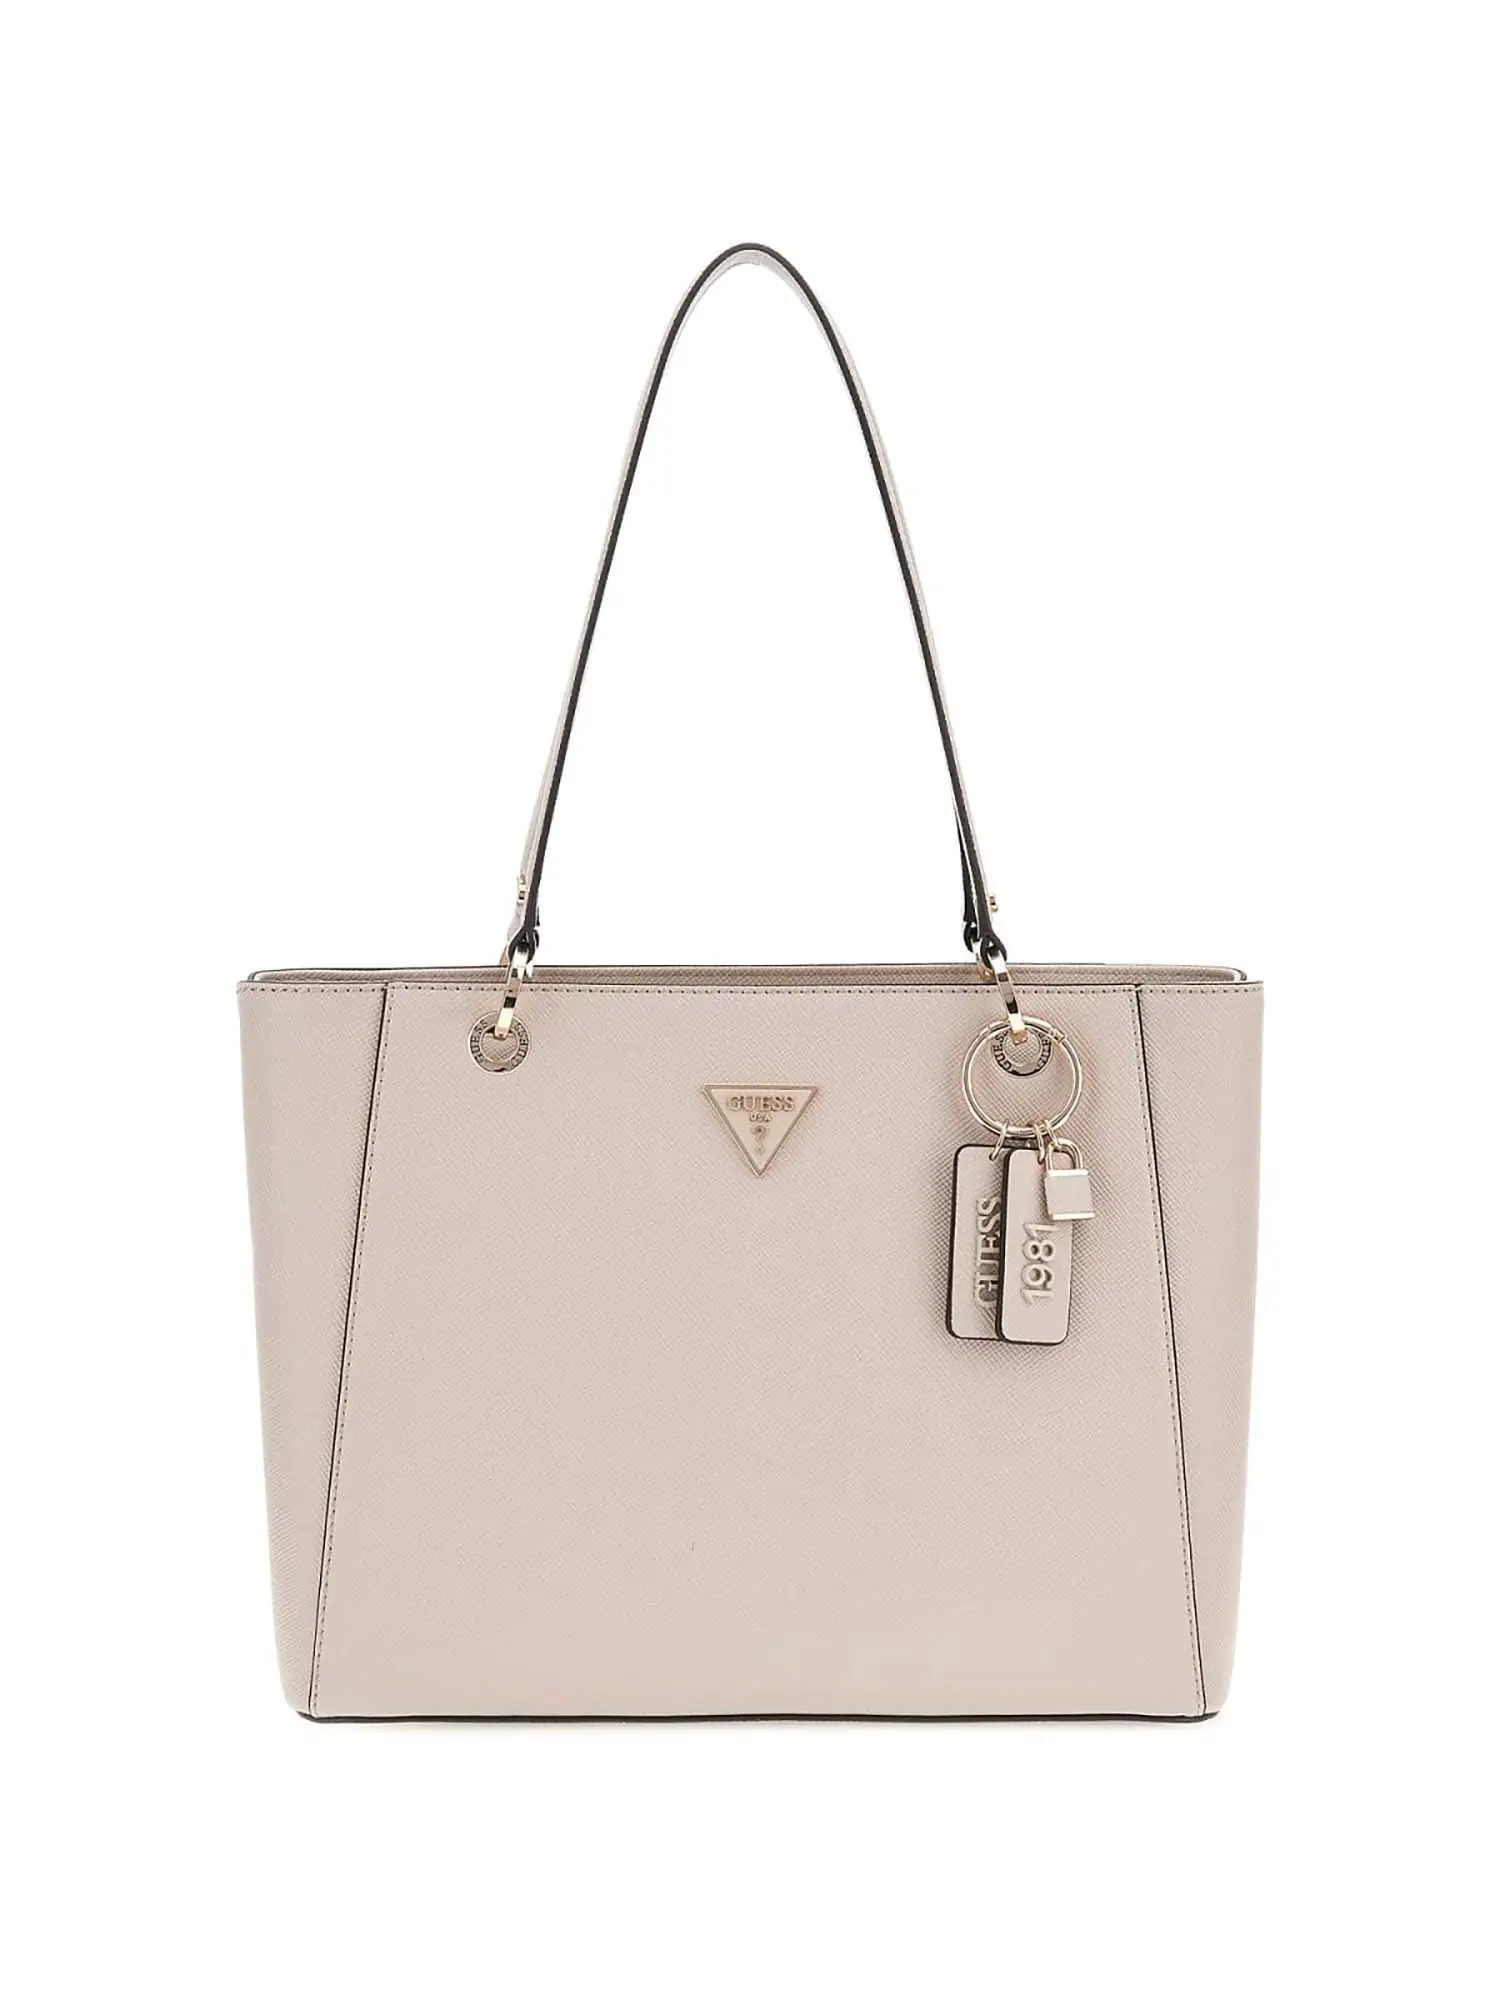 TOTE DONNA - GUESS - HWZG78 79250 - TAUPE, UNICA